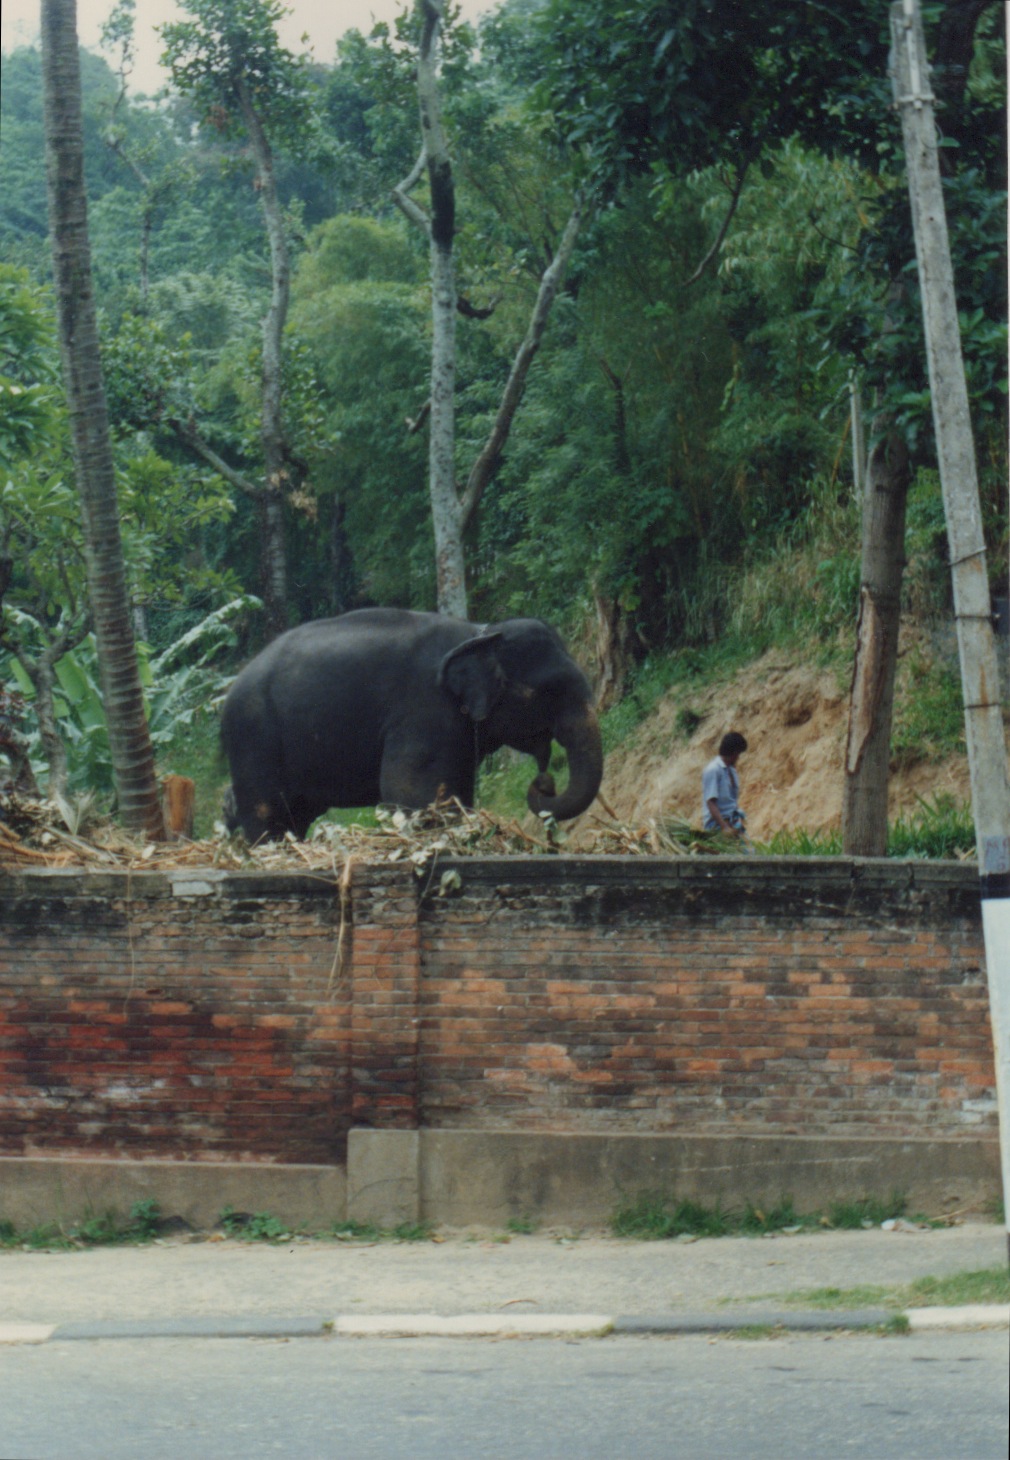 Elephants in the streets and by the sides of the roads.